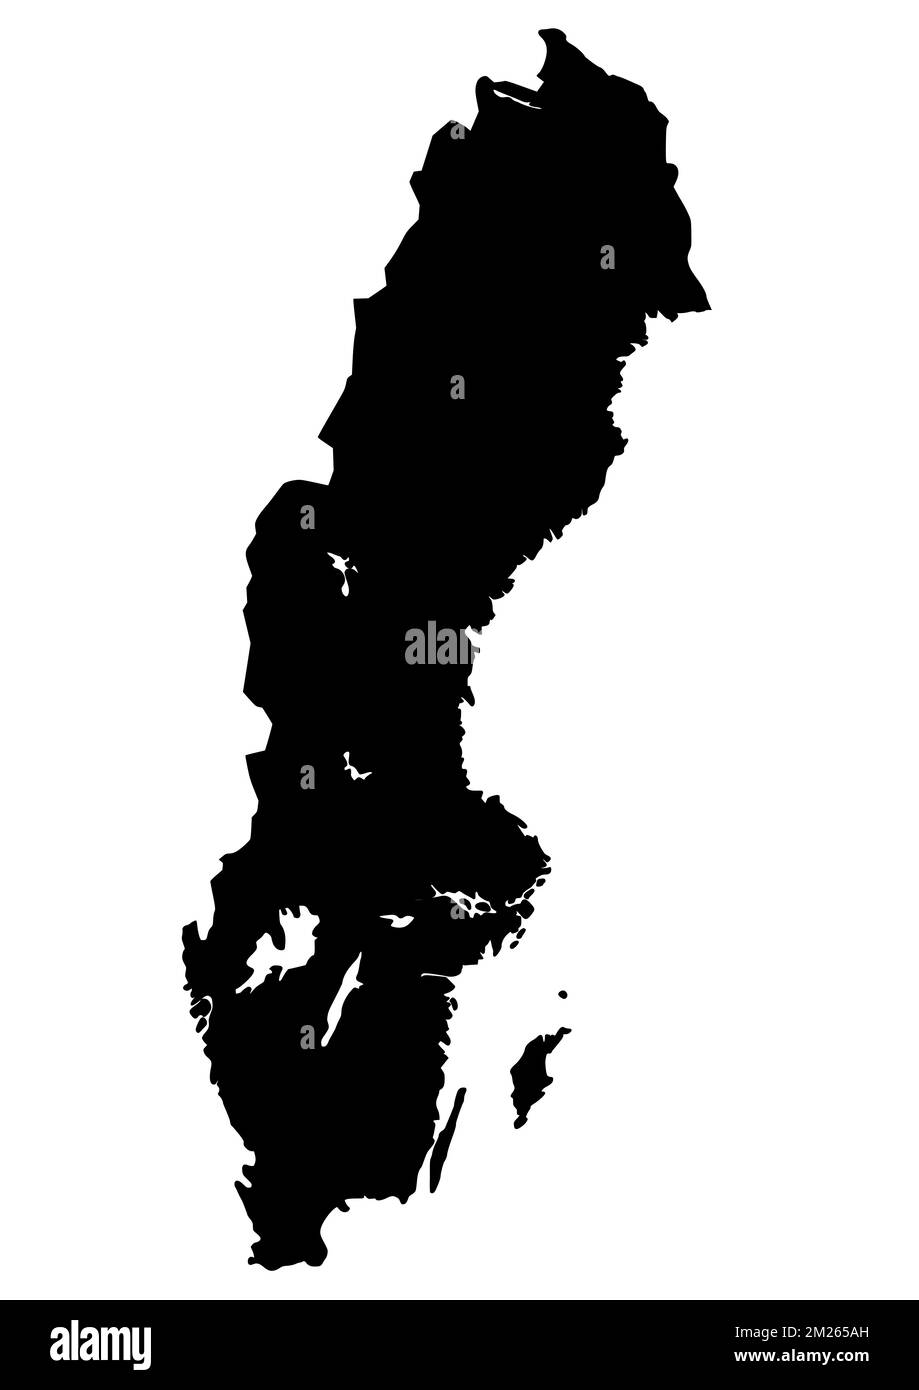 Map of Sweden filled with black color Stock Photo